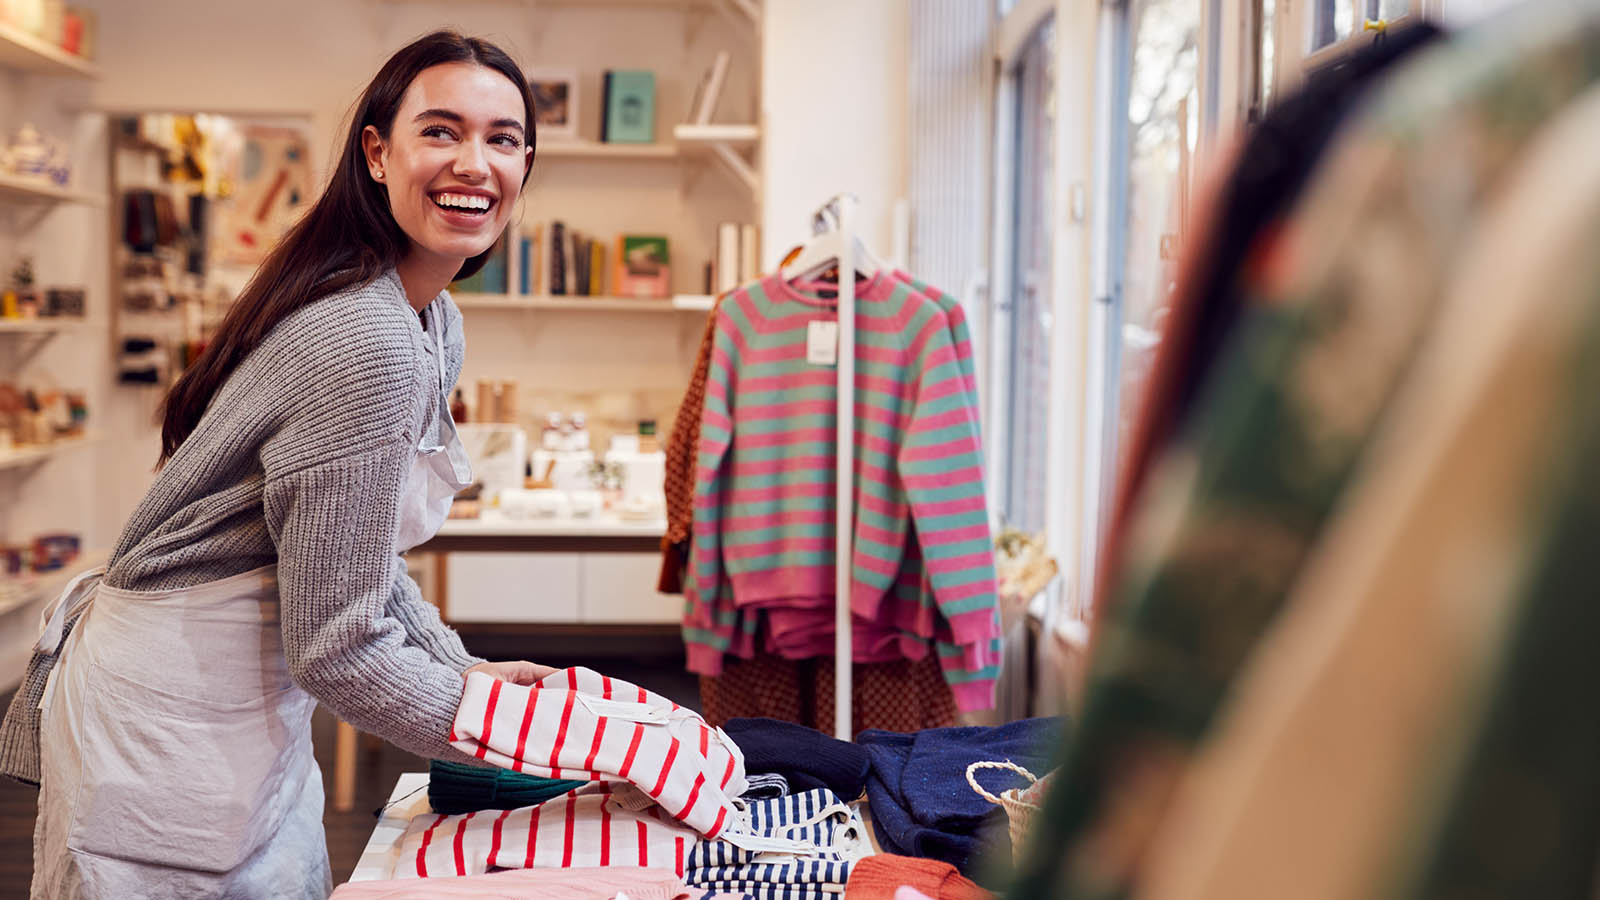 Woman in a retail store smiling and holding merchandise.